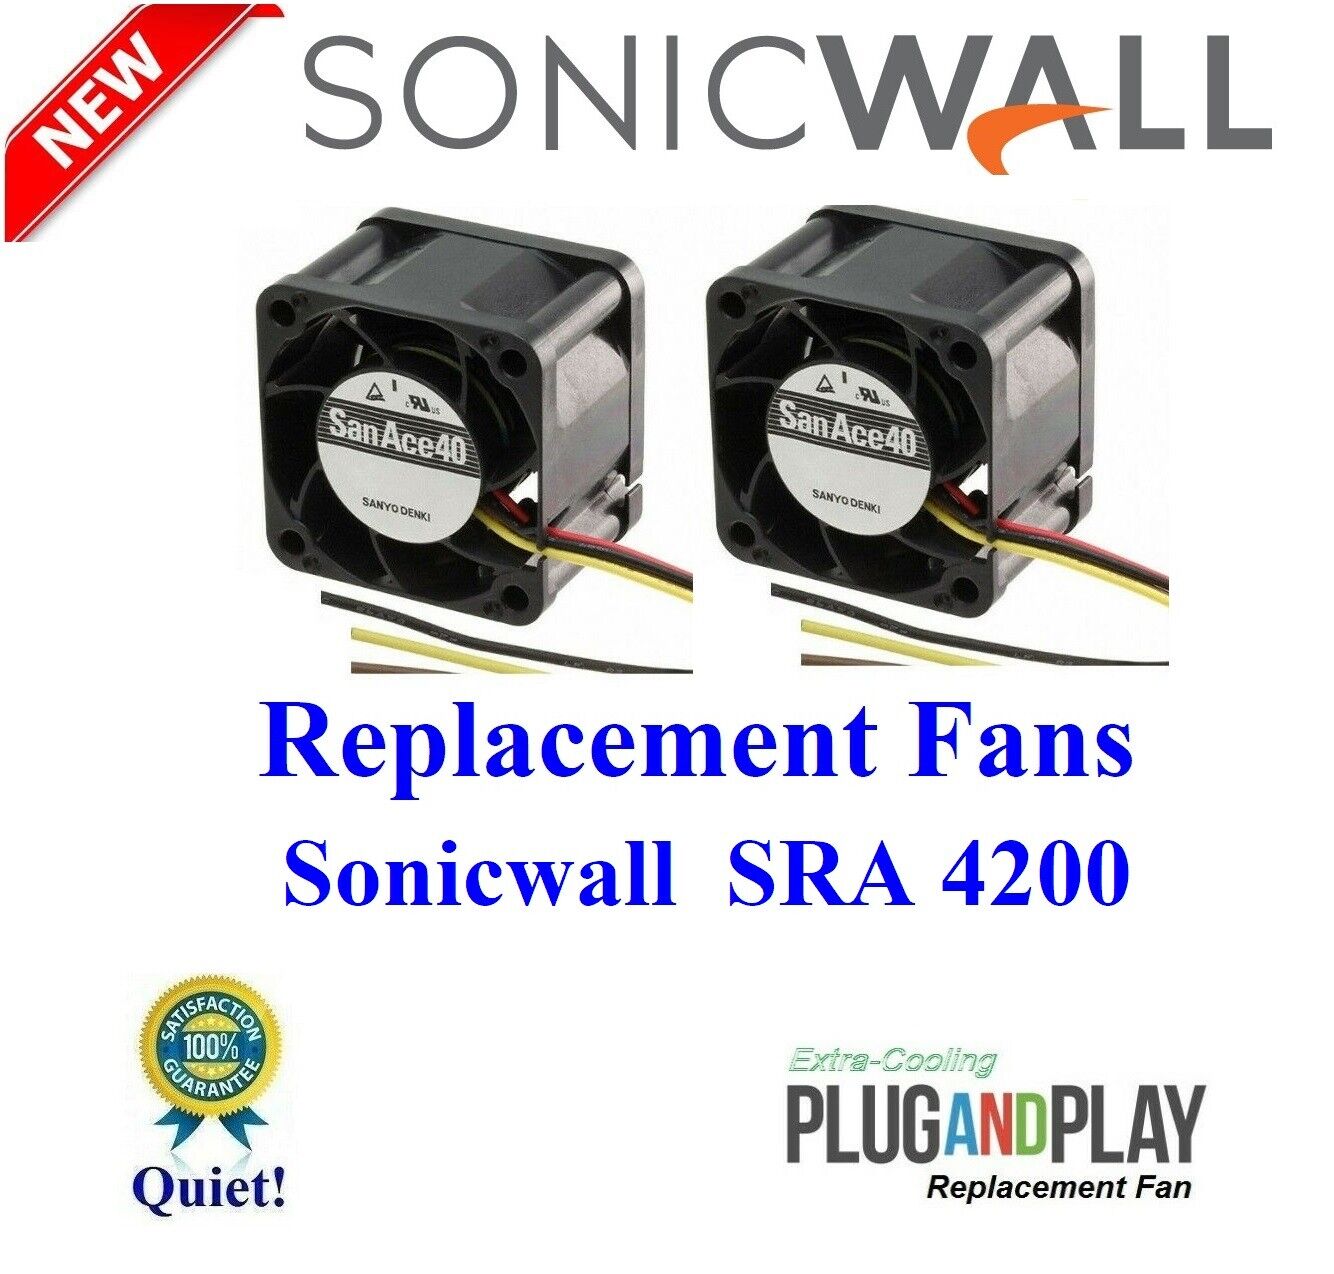 2x Quiet Fans for SonicWall SRA 4200